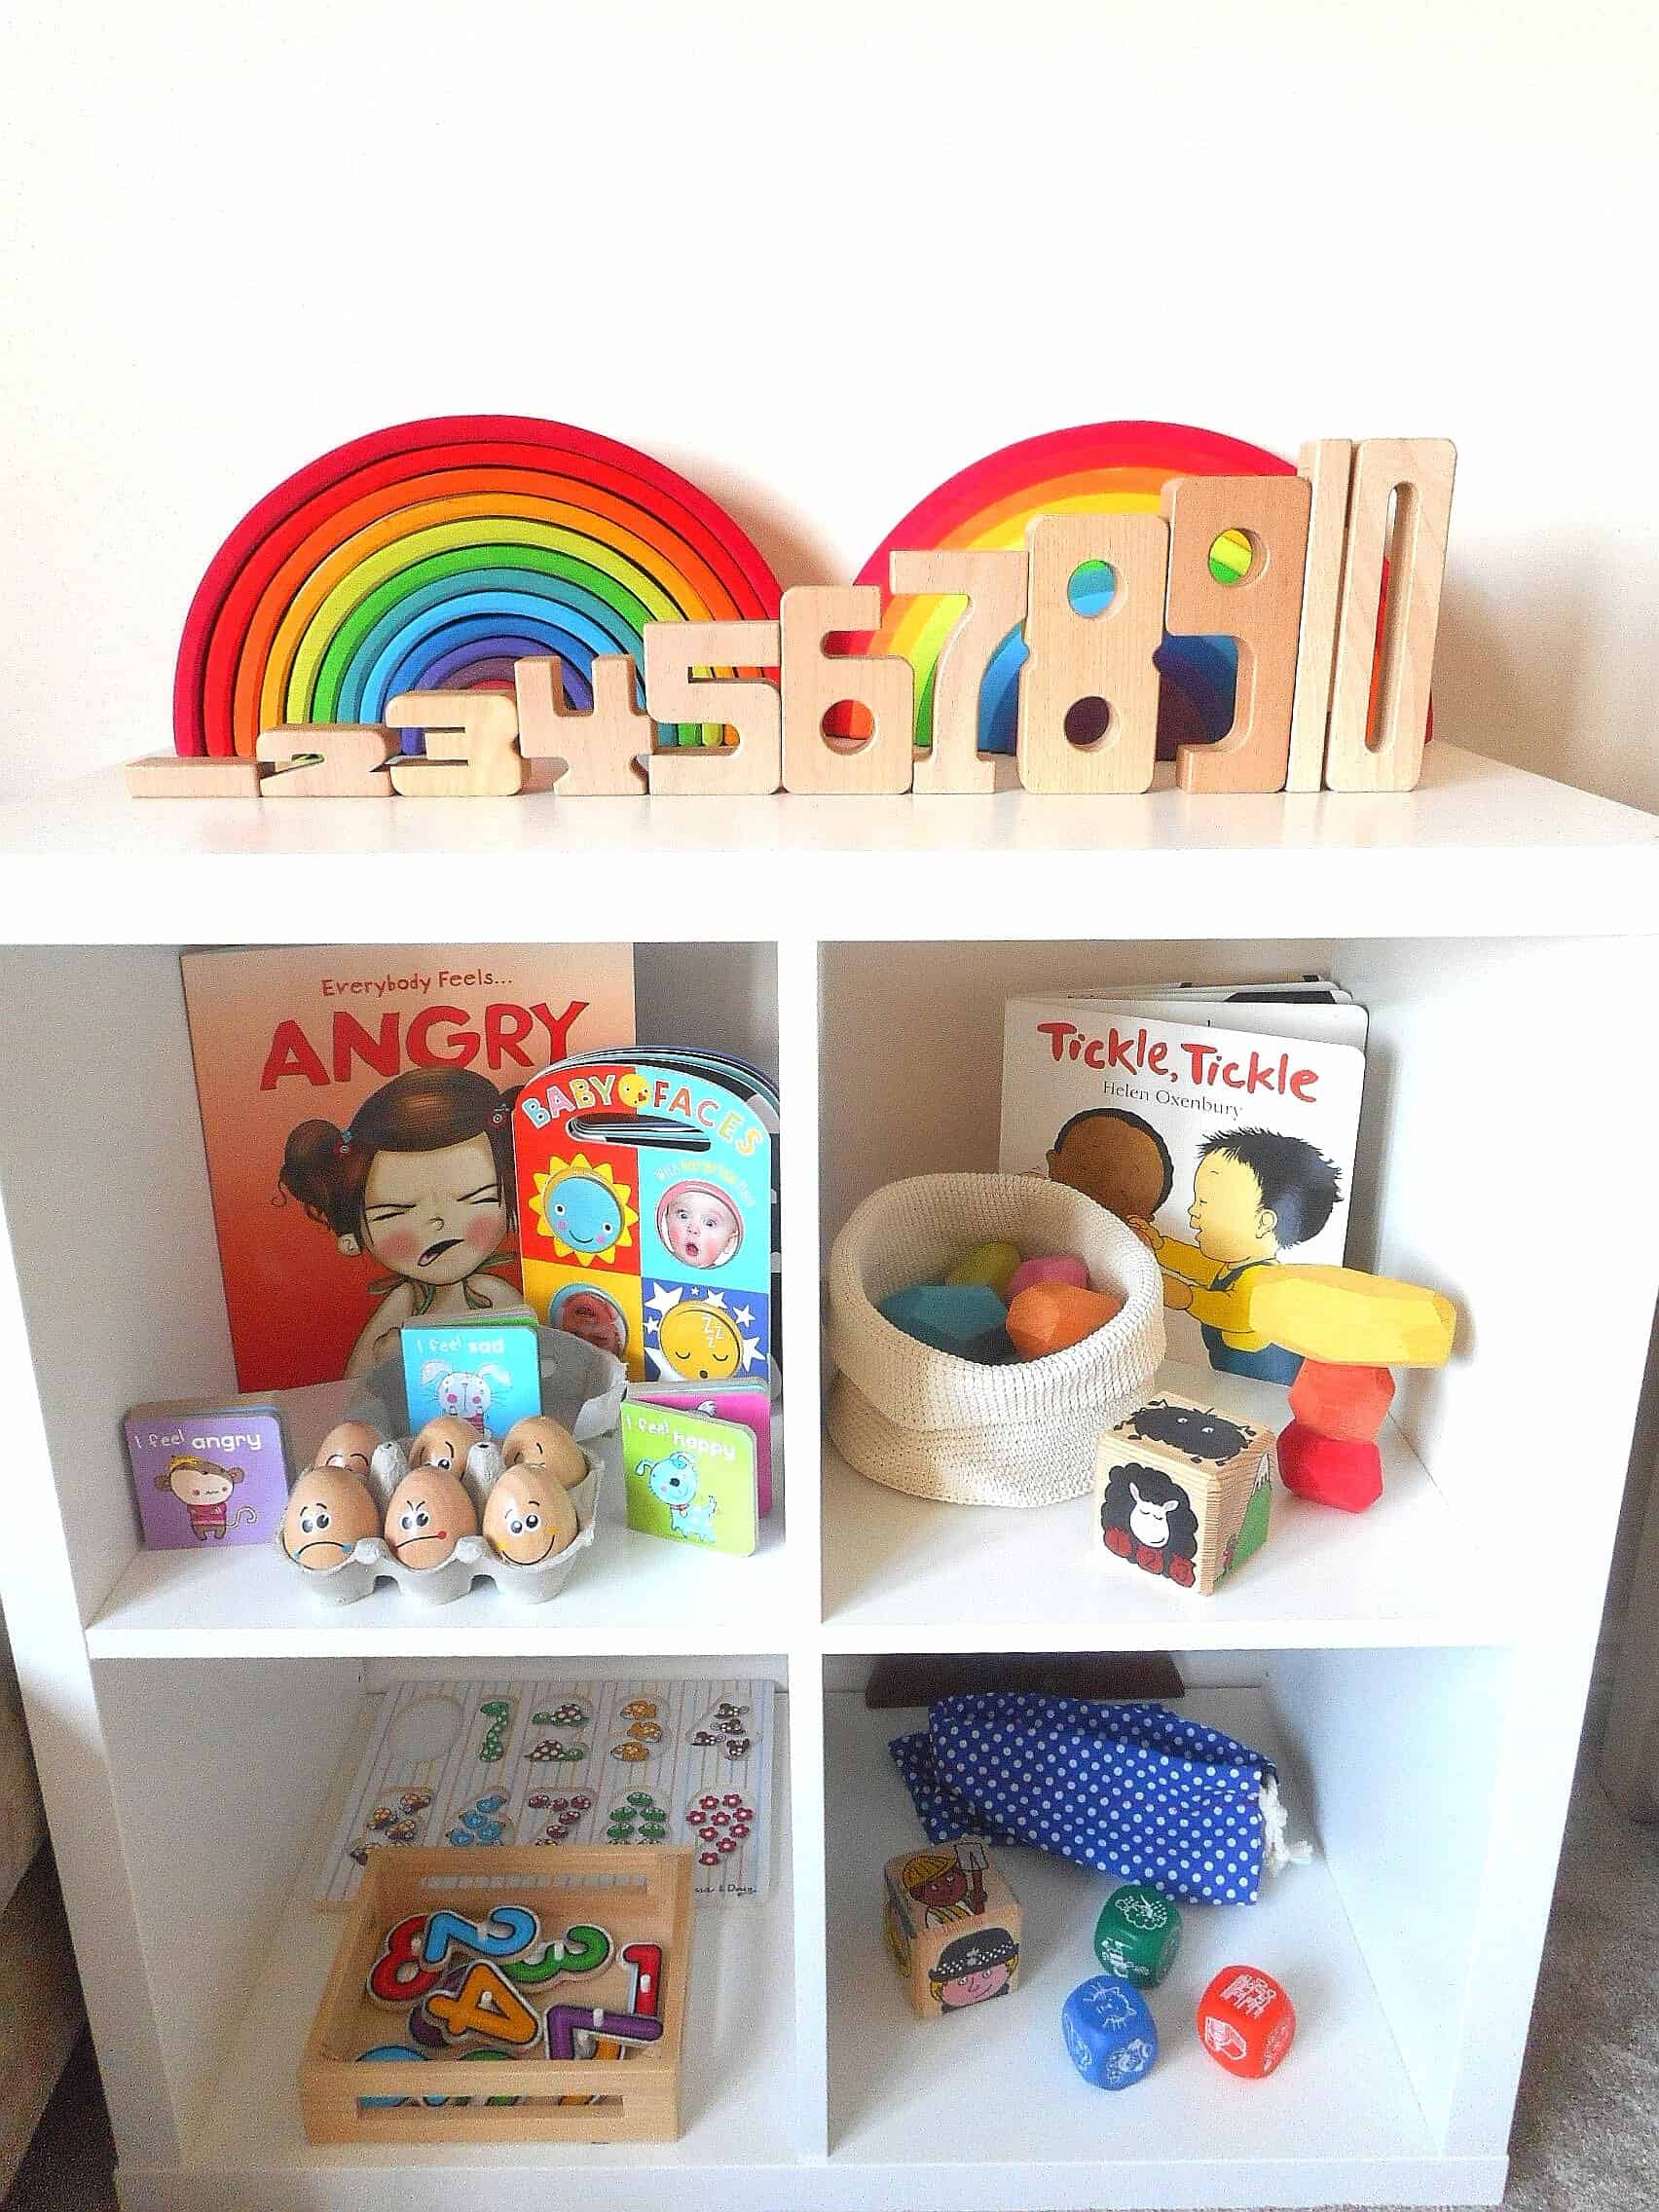 Shelfie - early years - toddler play - Preschooler - Grimms - Grapat - Eric&Albert - books - stories - Wooden Toys - Construction - Stacking- Mindfulness - Puzzles - Colours - Rainbow - Matching - Language - Words - Loose Parts - Farm Animals- Stories - Lanka Kade - Mushrooms - Story Stones - Rock Art - Small World - Feelings - Emotions - Number - numeracy